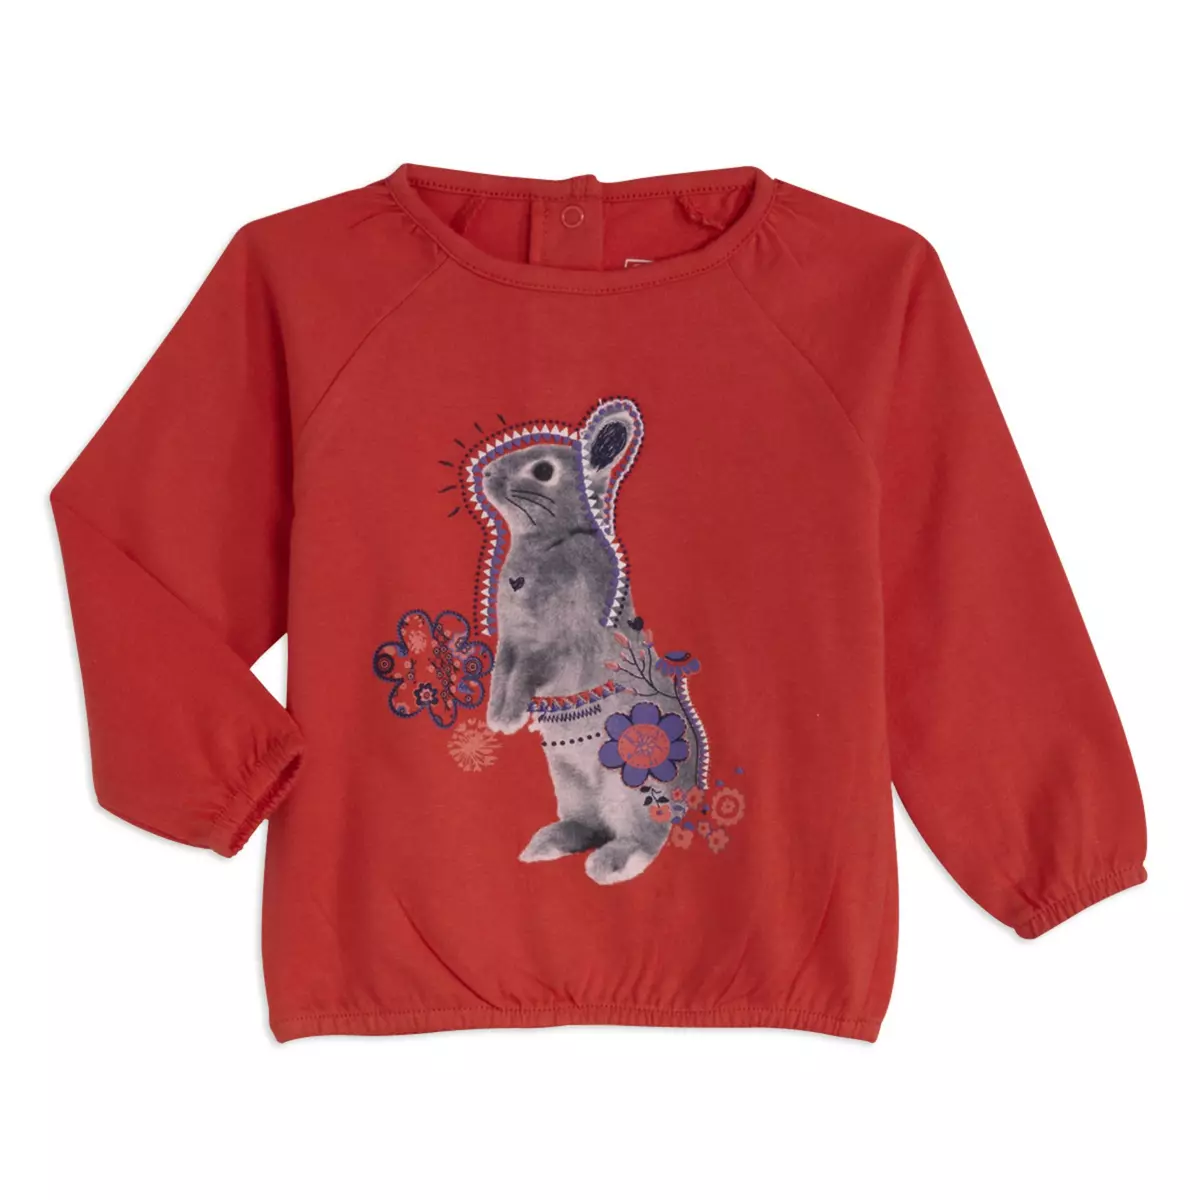 IN EXTENSO Tee-shirt manches longues Lapin bébé